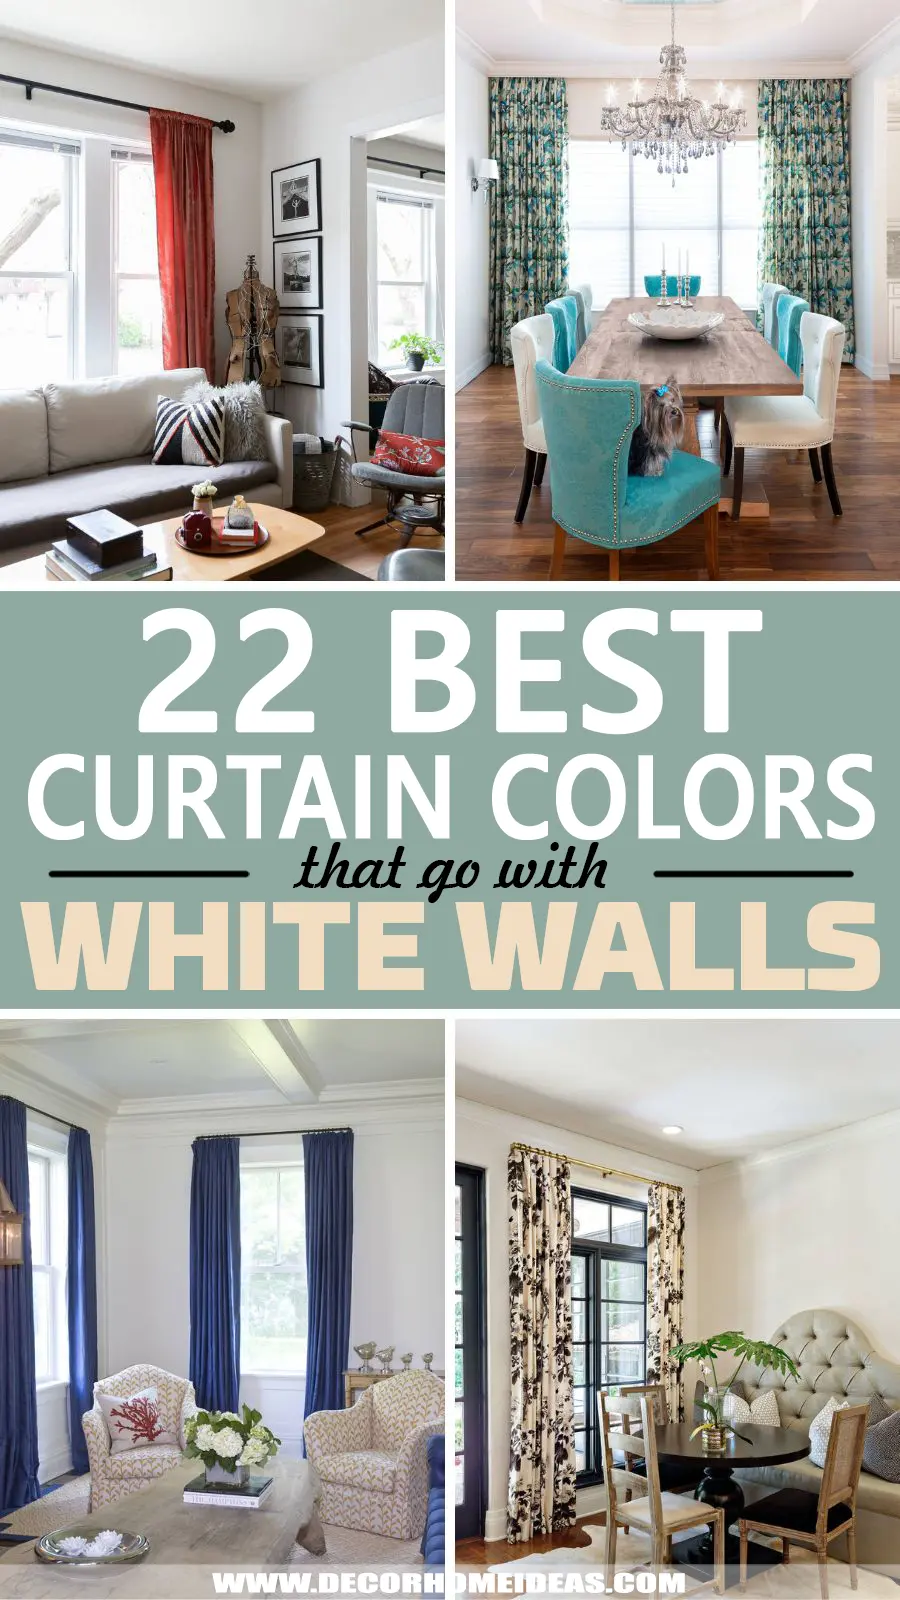 Curtains For White Walls Best Designs. Add a pop of color to your white walls with these bright and colorful curtains. Whether you like patterned or one-colored curtains we have all of them.